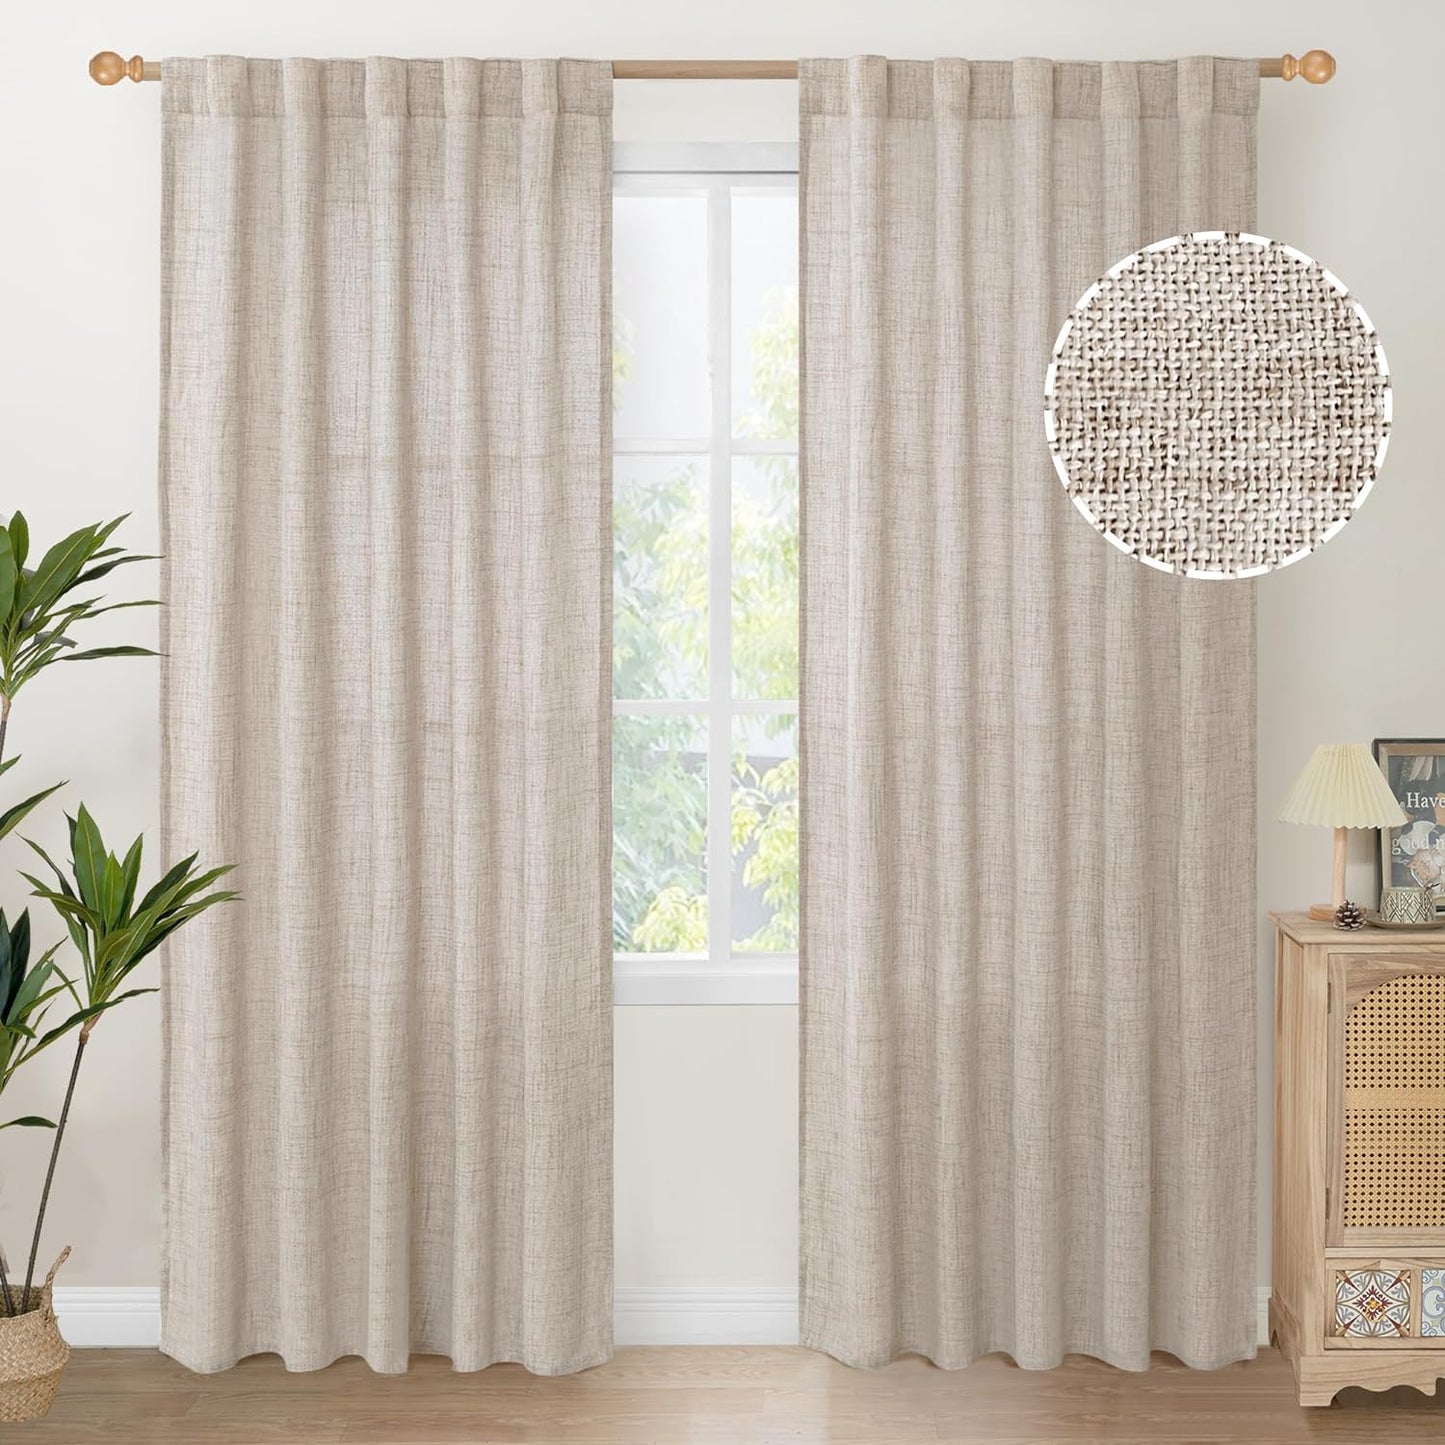 Youngstex Natural Linen Curtains 72 Inch Length 2 Panels for Living Room Light Filtering Textured Window Drapes for Bedroom Dining Office Back Tab Rod Pocket, 52 X 72 Inch  YoungsTex Natural 38W X 84L 